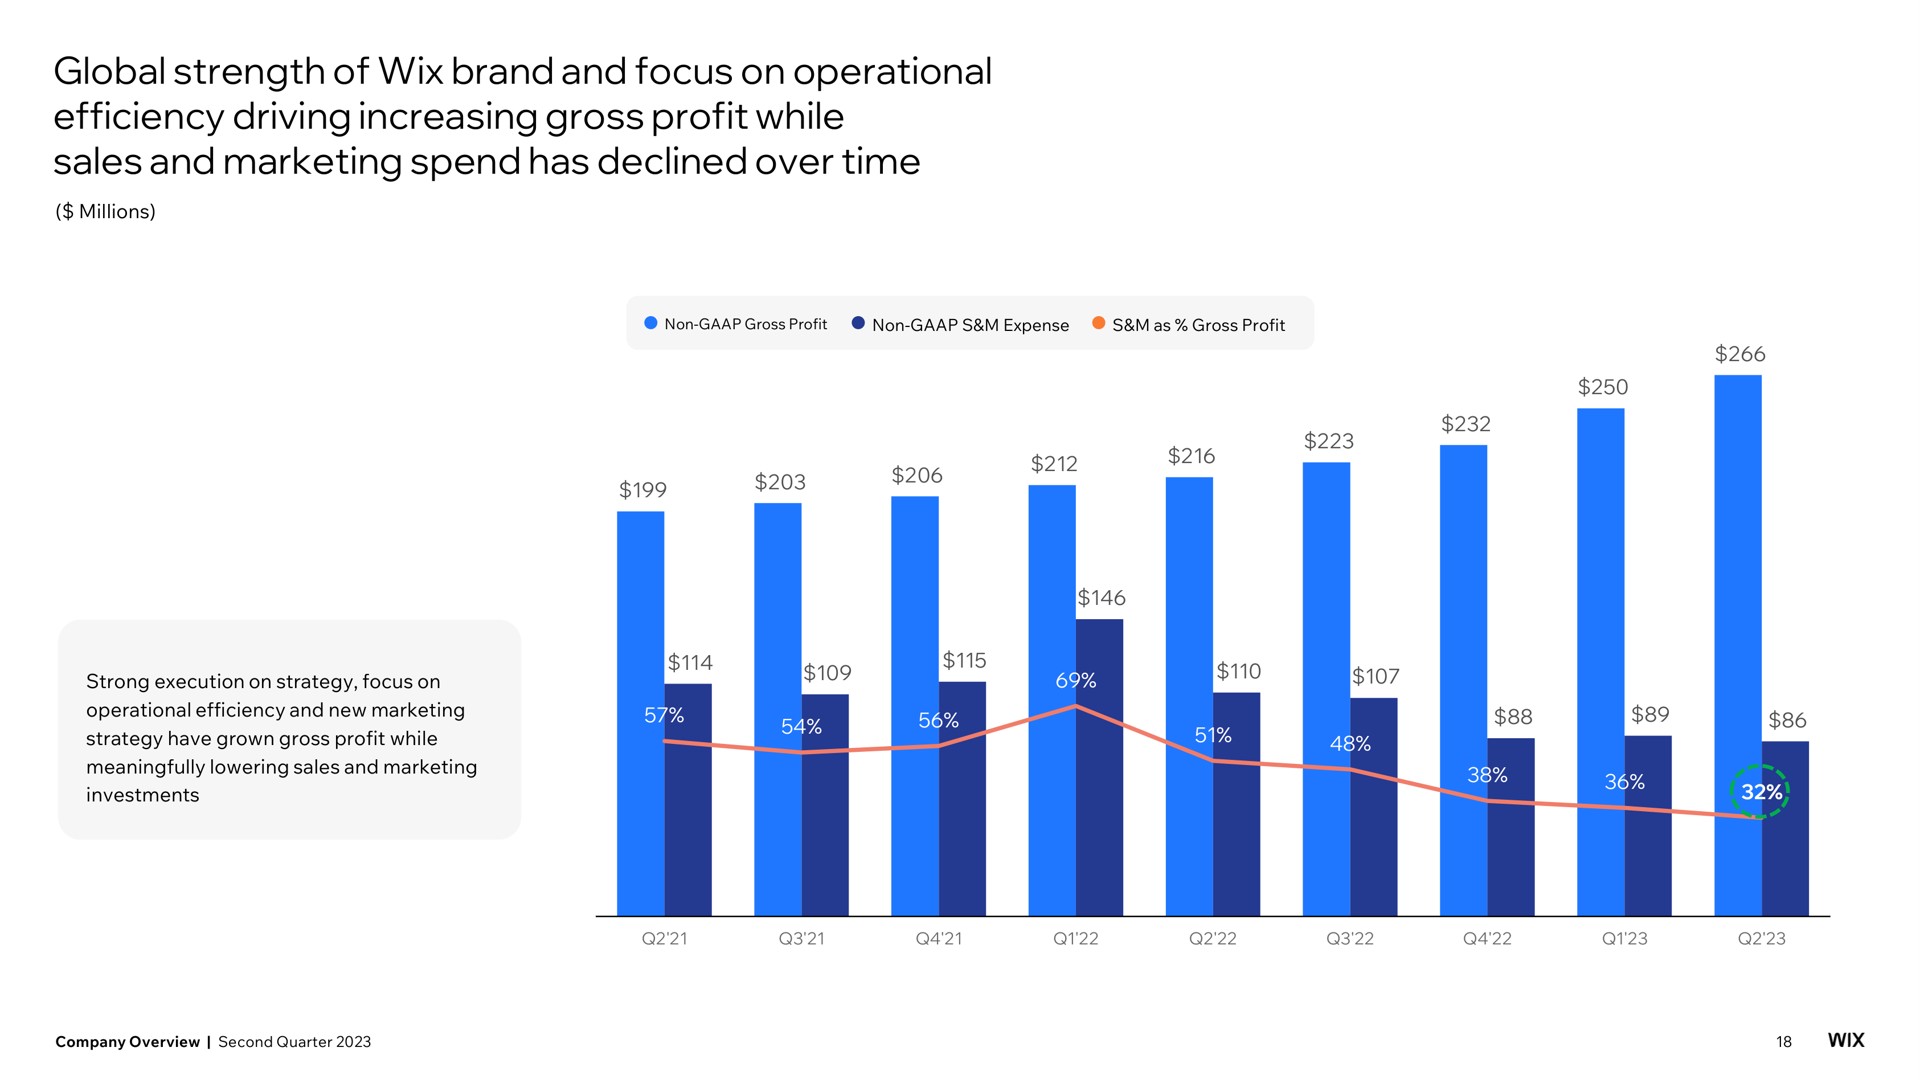 global strength of brand and focus on operational efficiency driving increasing gross profit while sales and marketing spend has declined over time | Wix